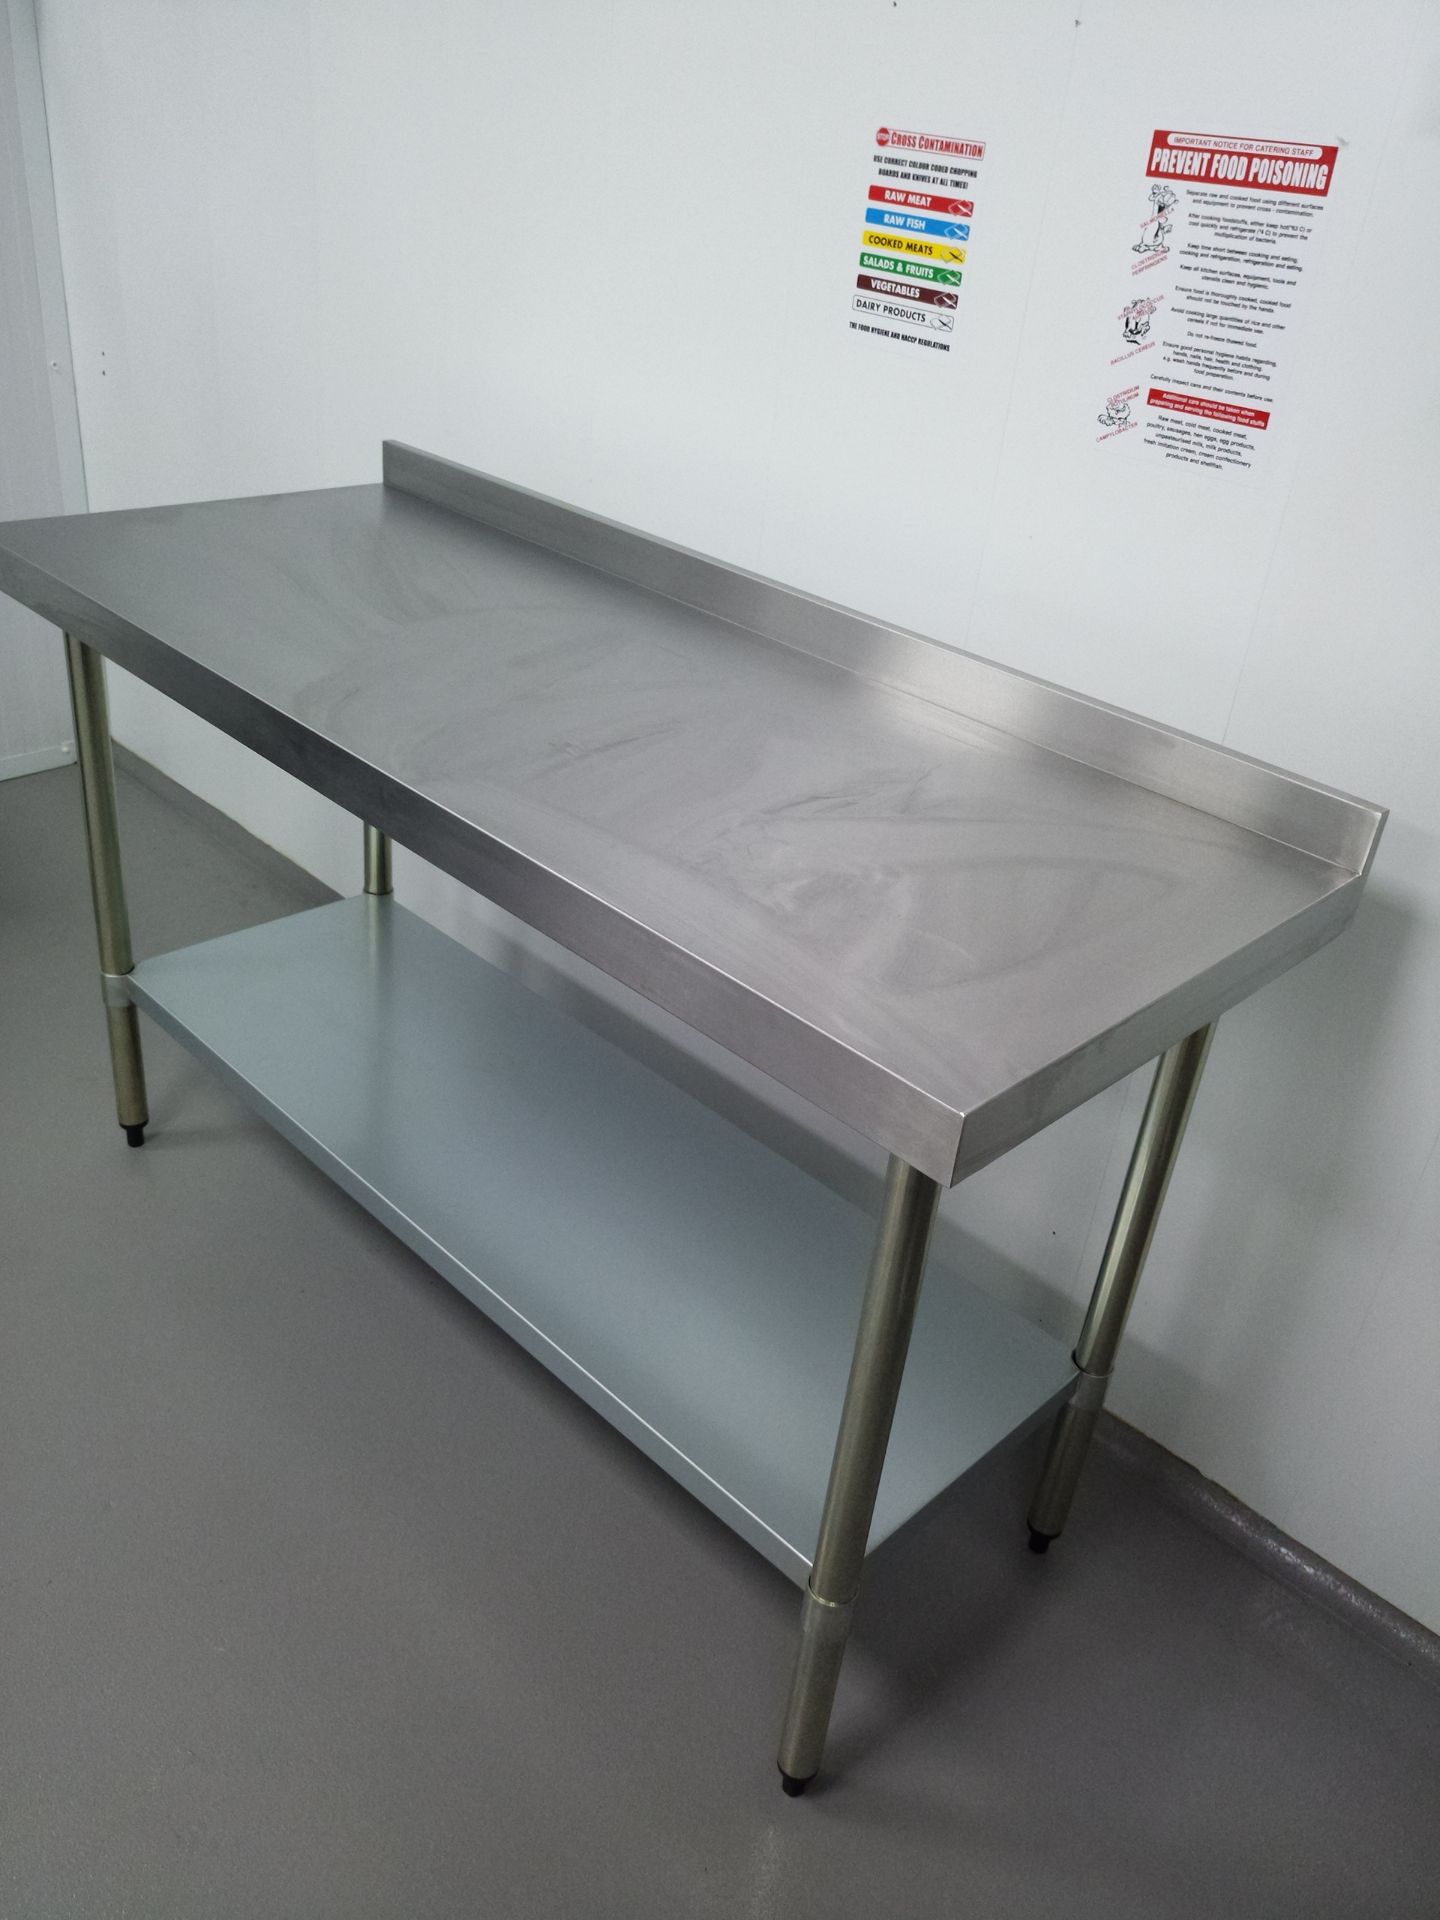 Vogue Stainless Steel Table with Upstand 1500mm - Image 2 of 2